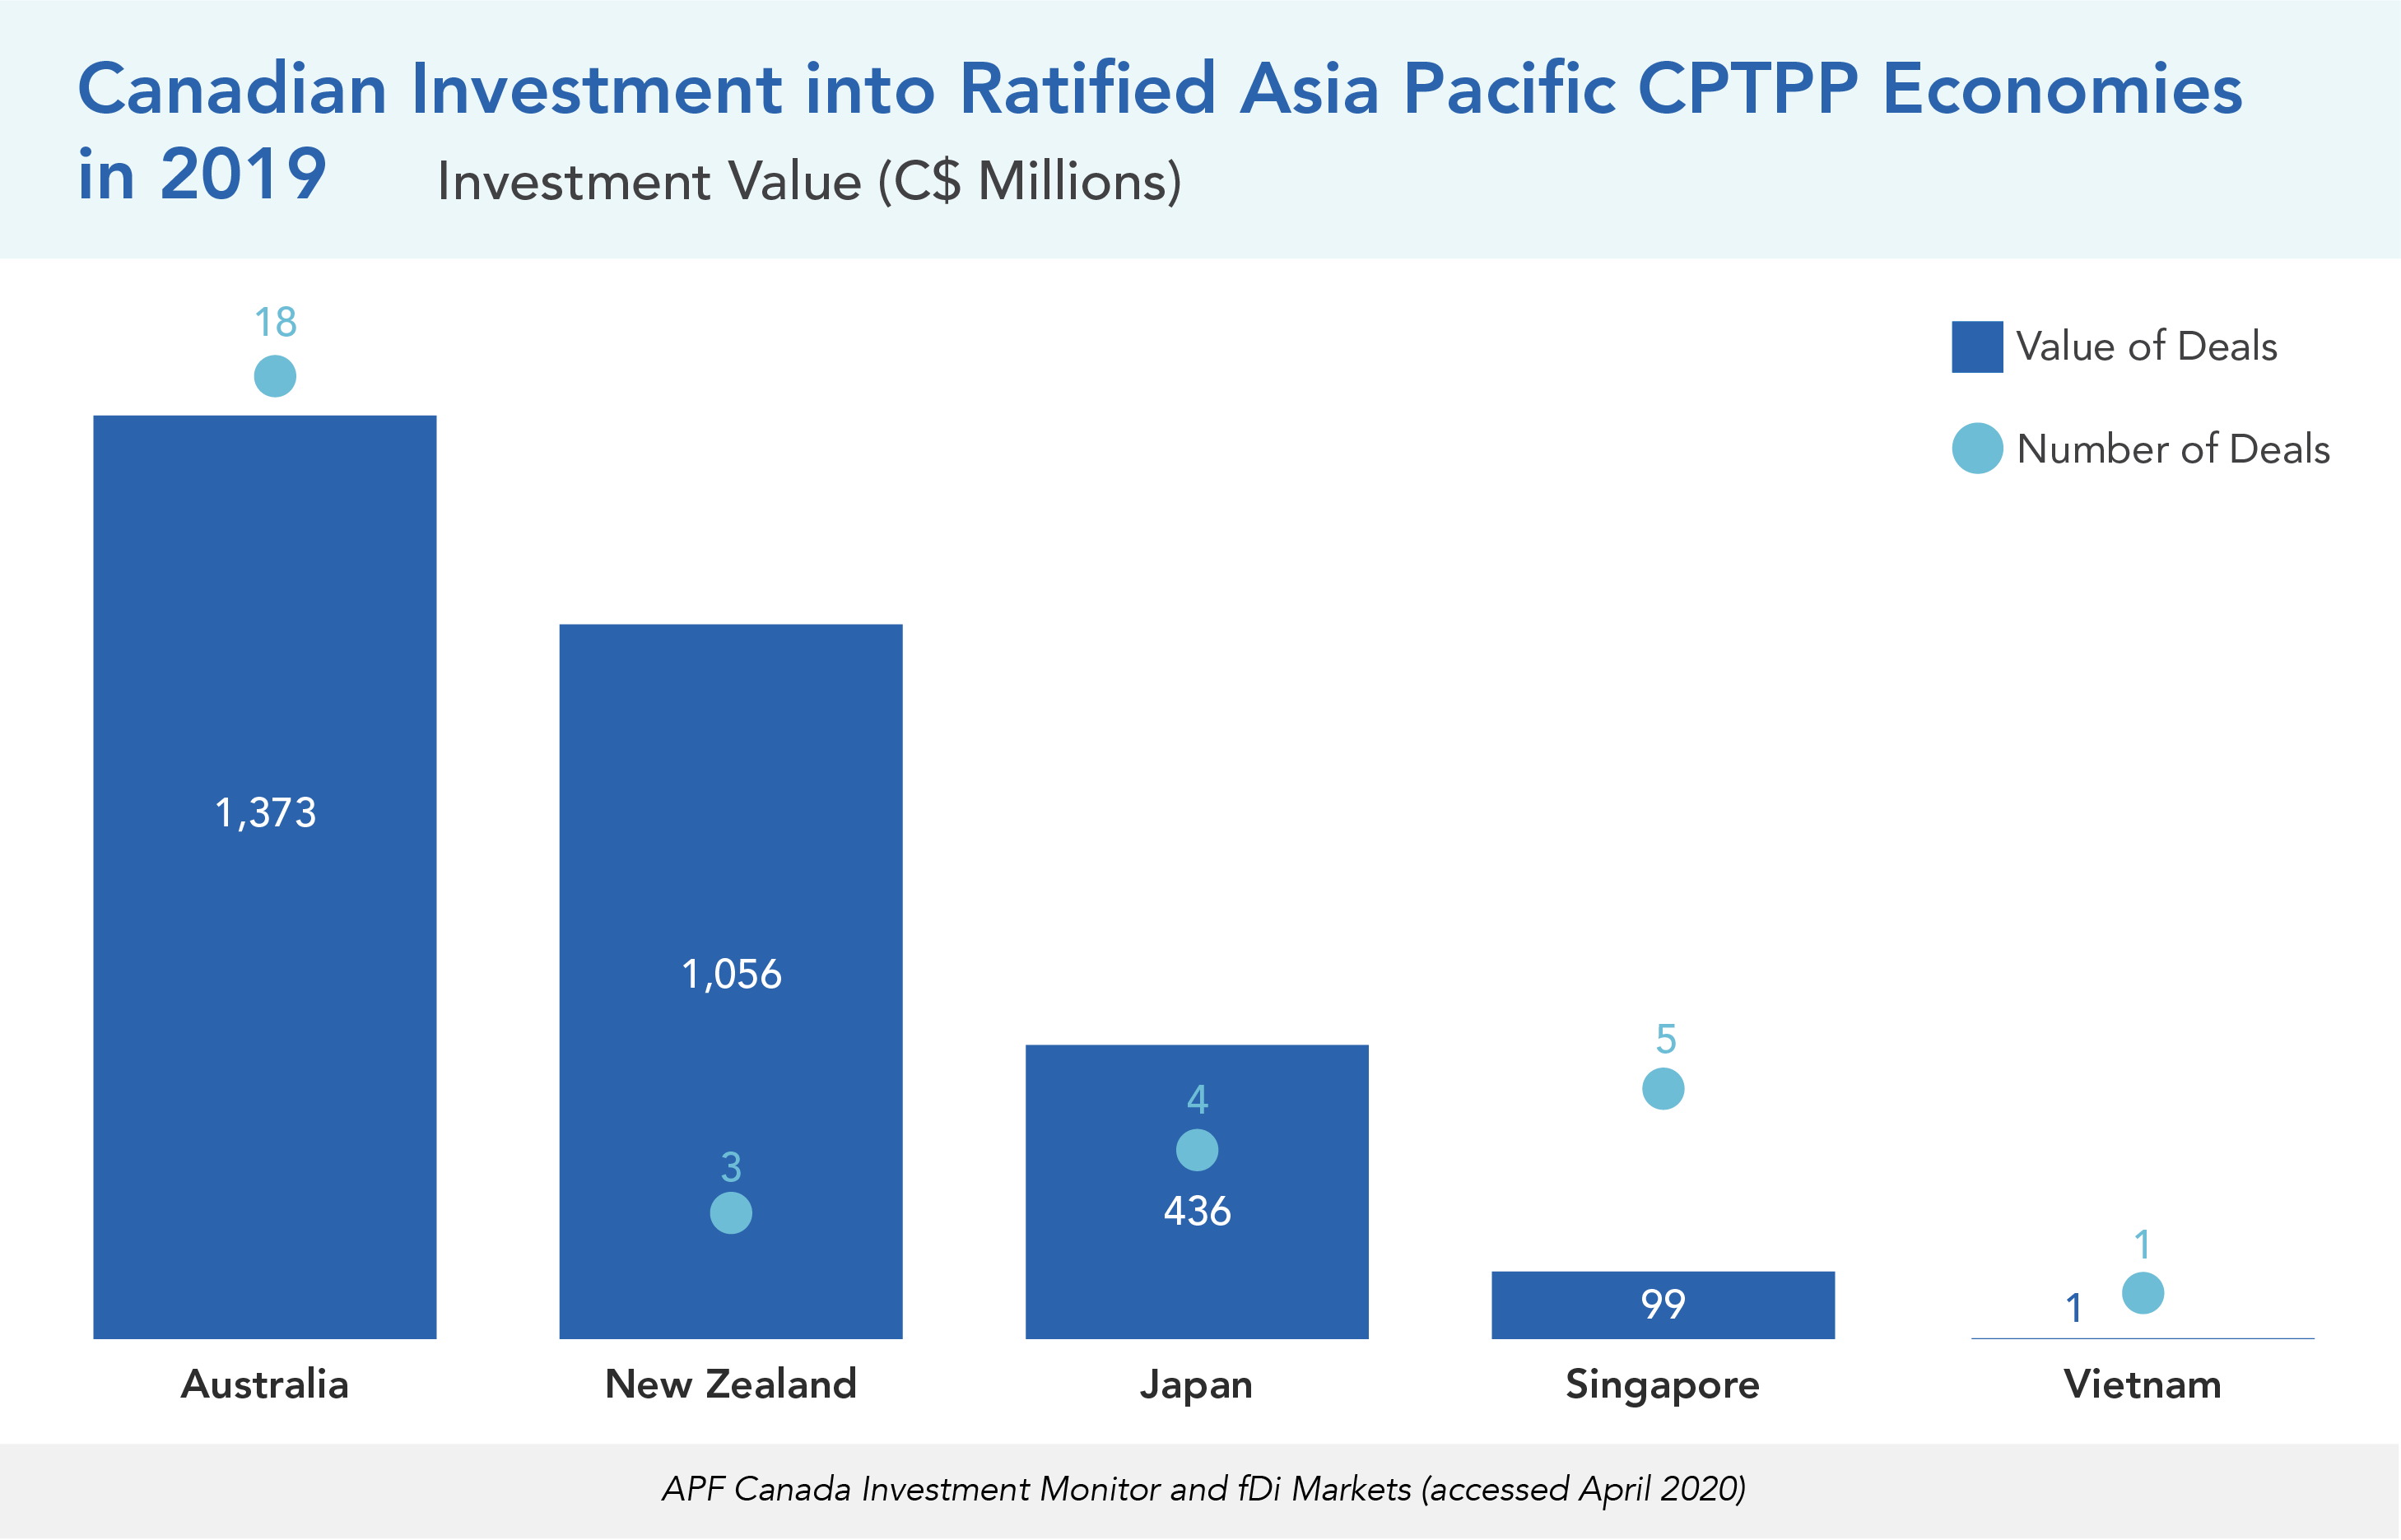 Canadian Investment into Ratified Asia Pacific CPTPP Economies in 2019